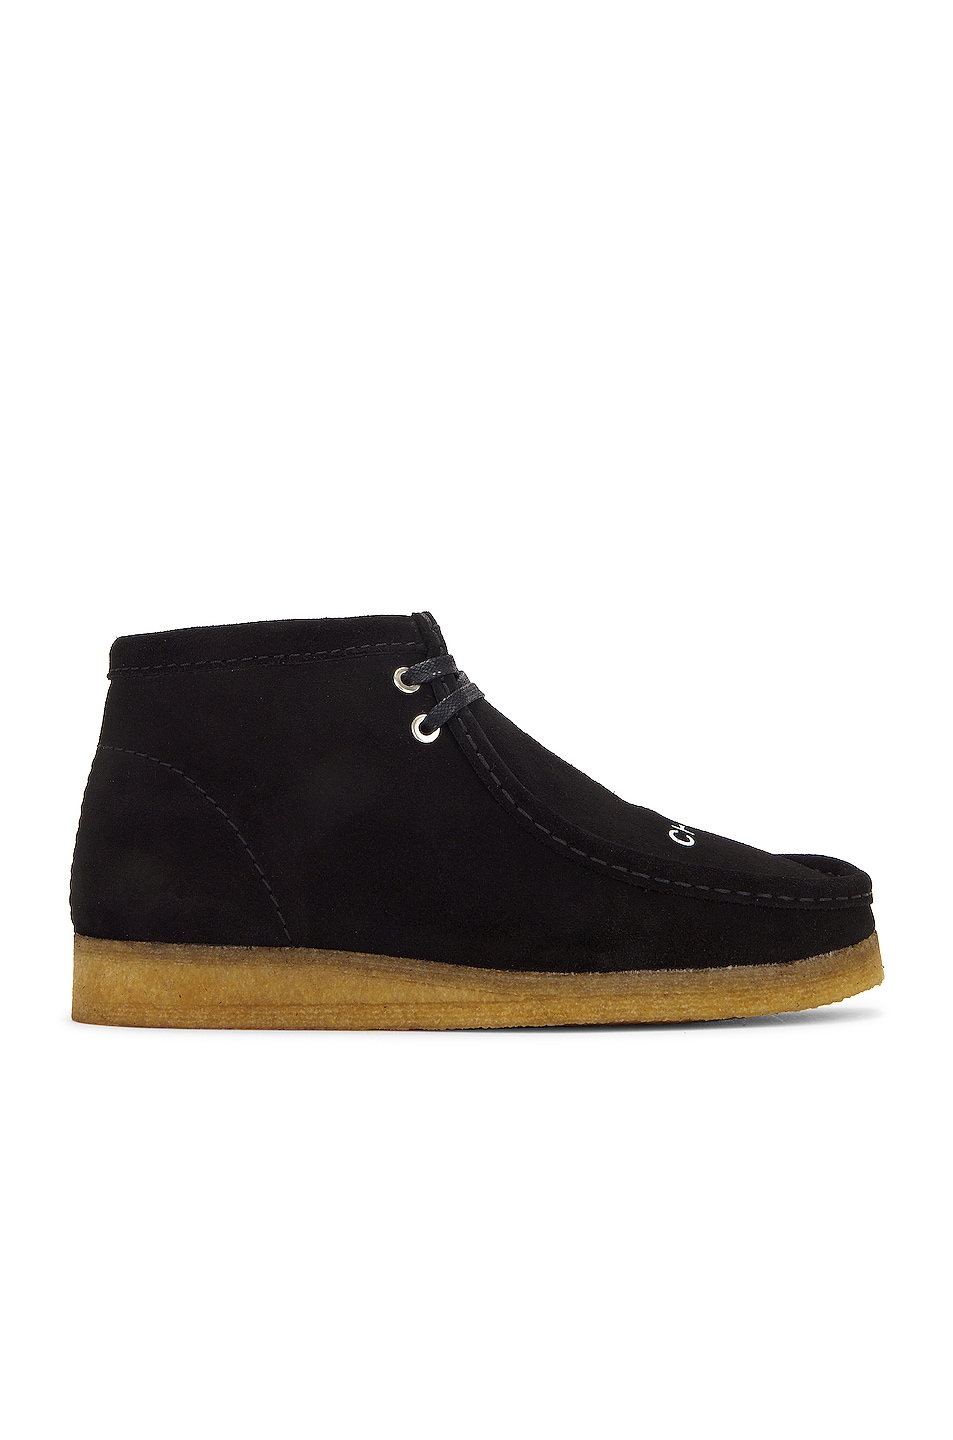 Image 1 of Undercover x Clarks Wallabee in Black